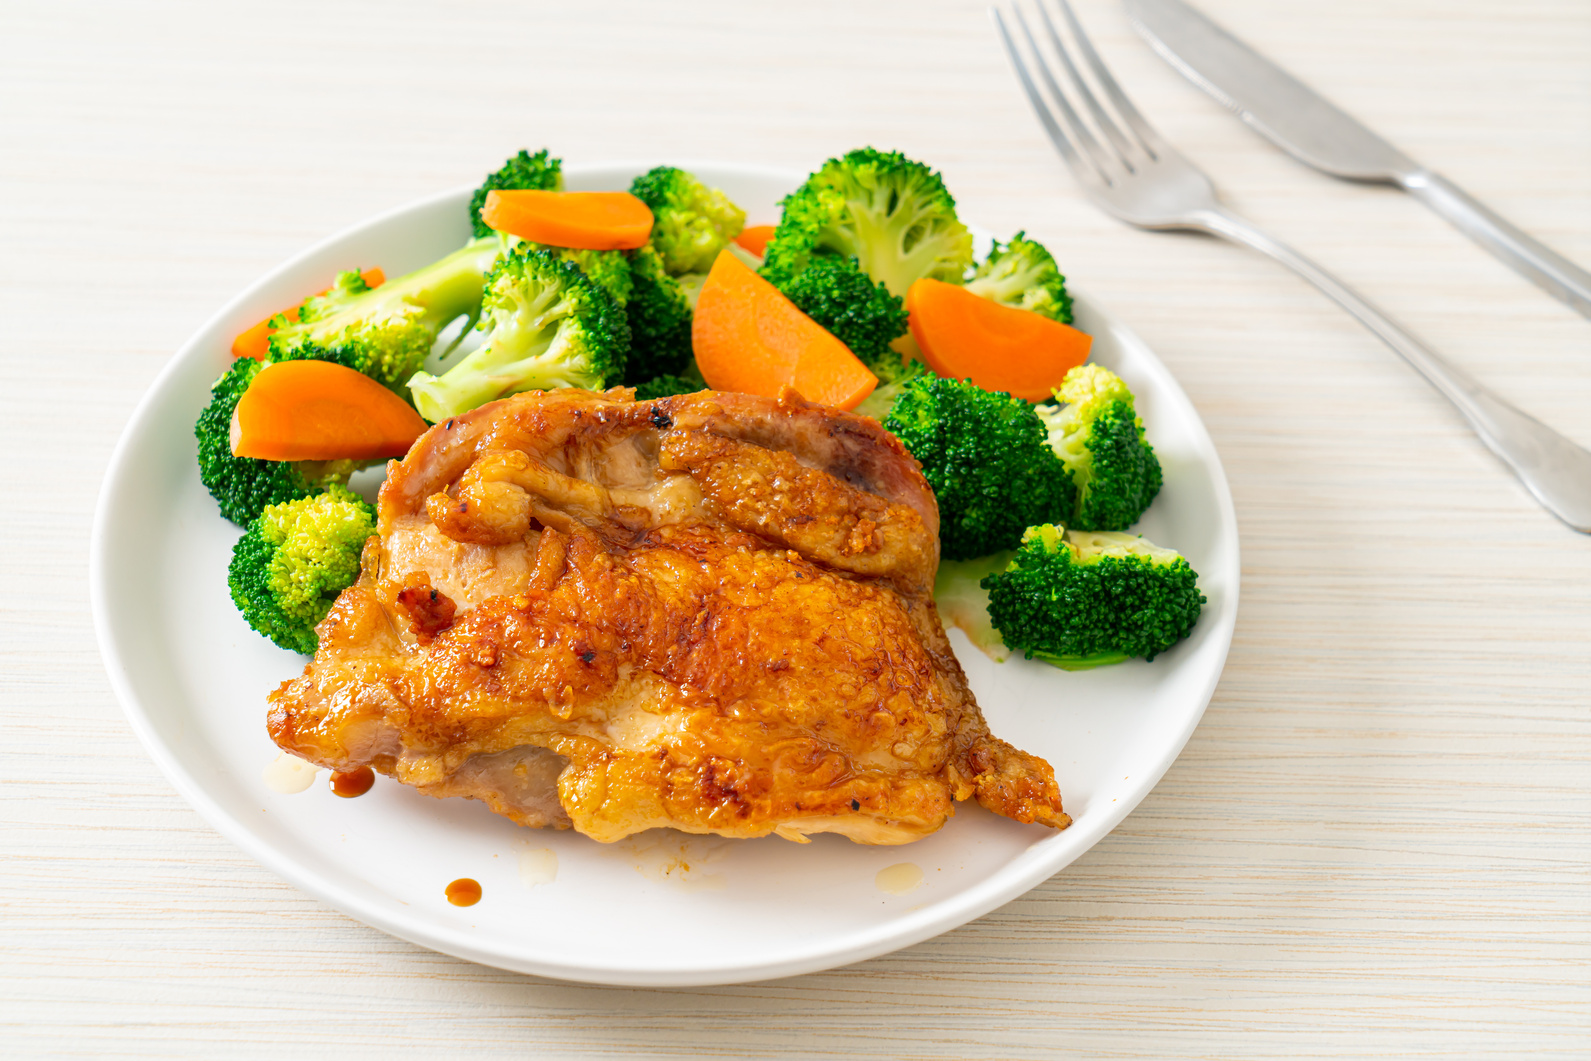 Chicken Steak with Broccoli and Carrot